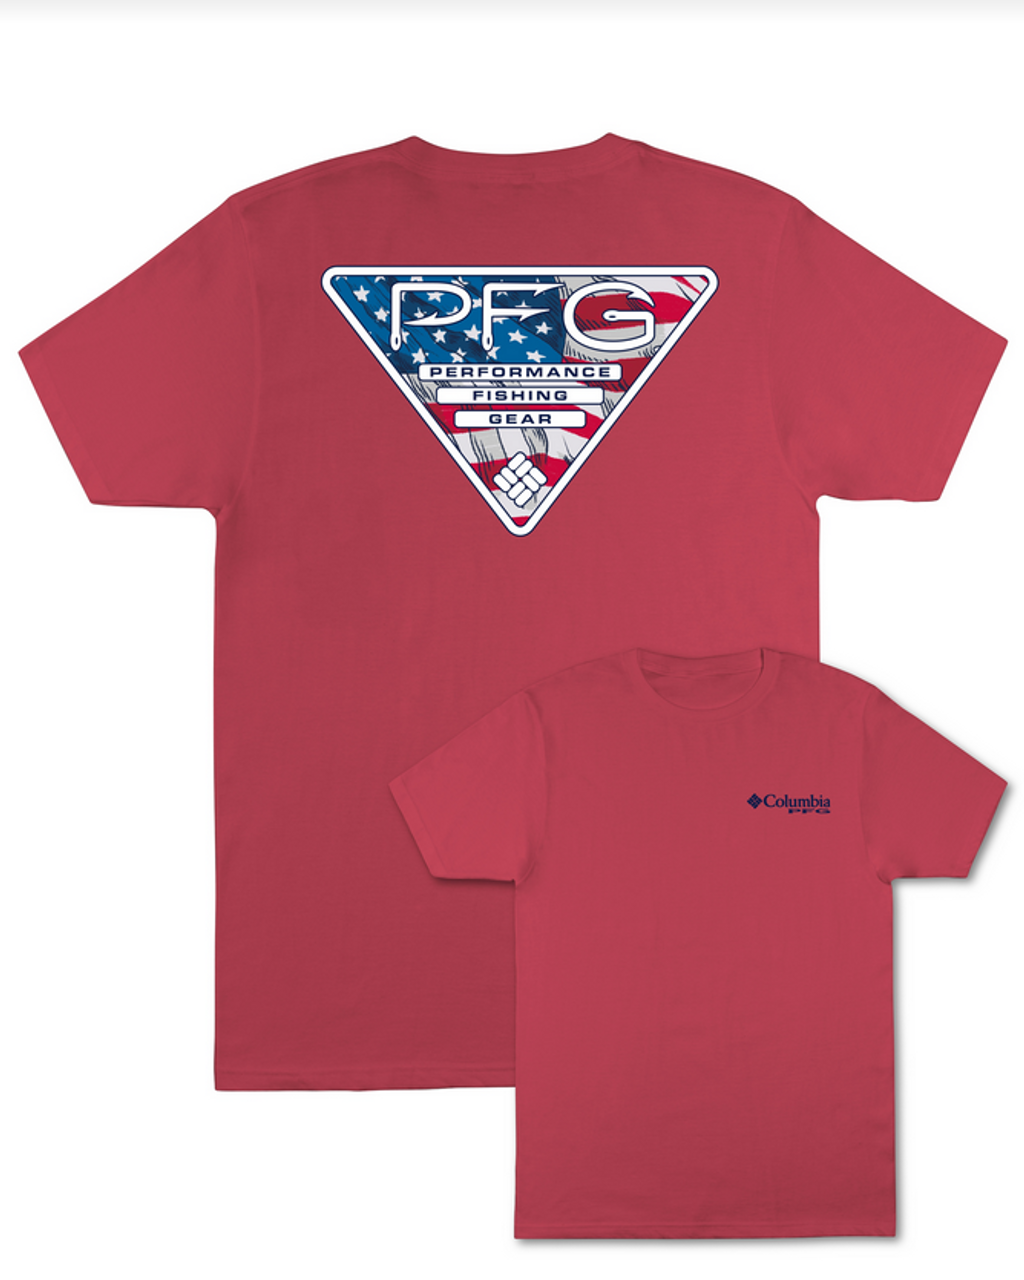 COLUMBIA PFG CREEL T-SHIRT SUNSET RED - Pee Dee Outfitters